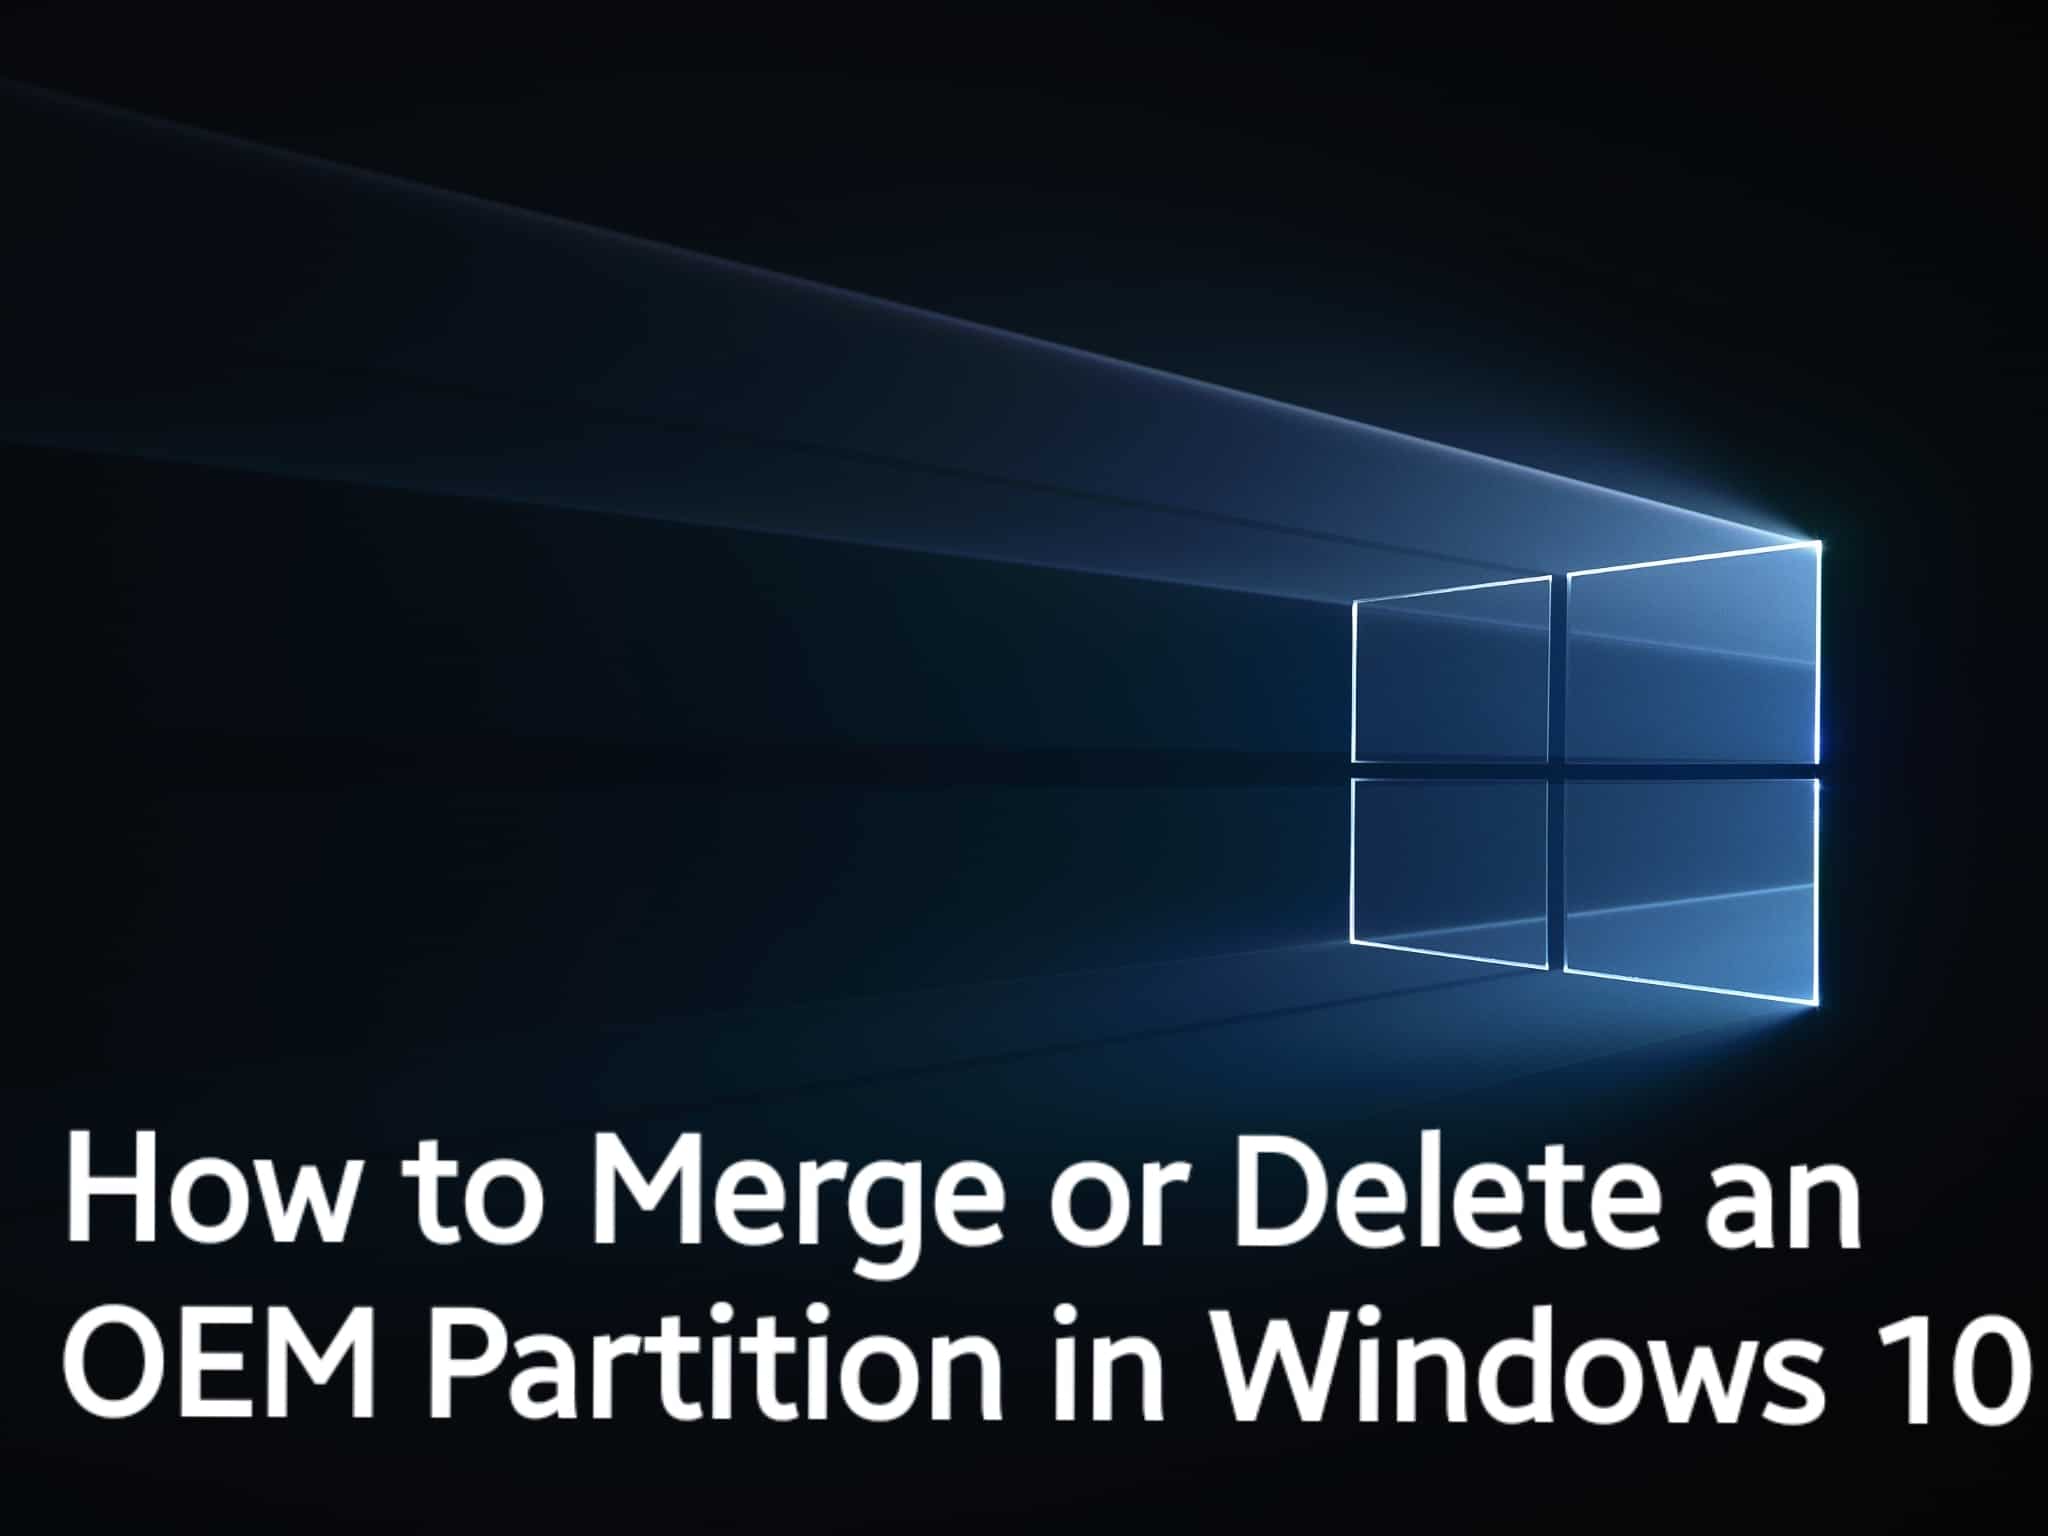 How to Merge or Delete an OEM Partition in Windows 10